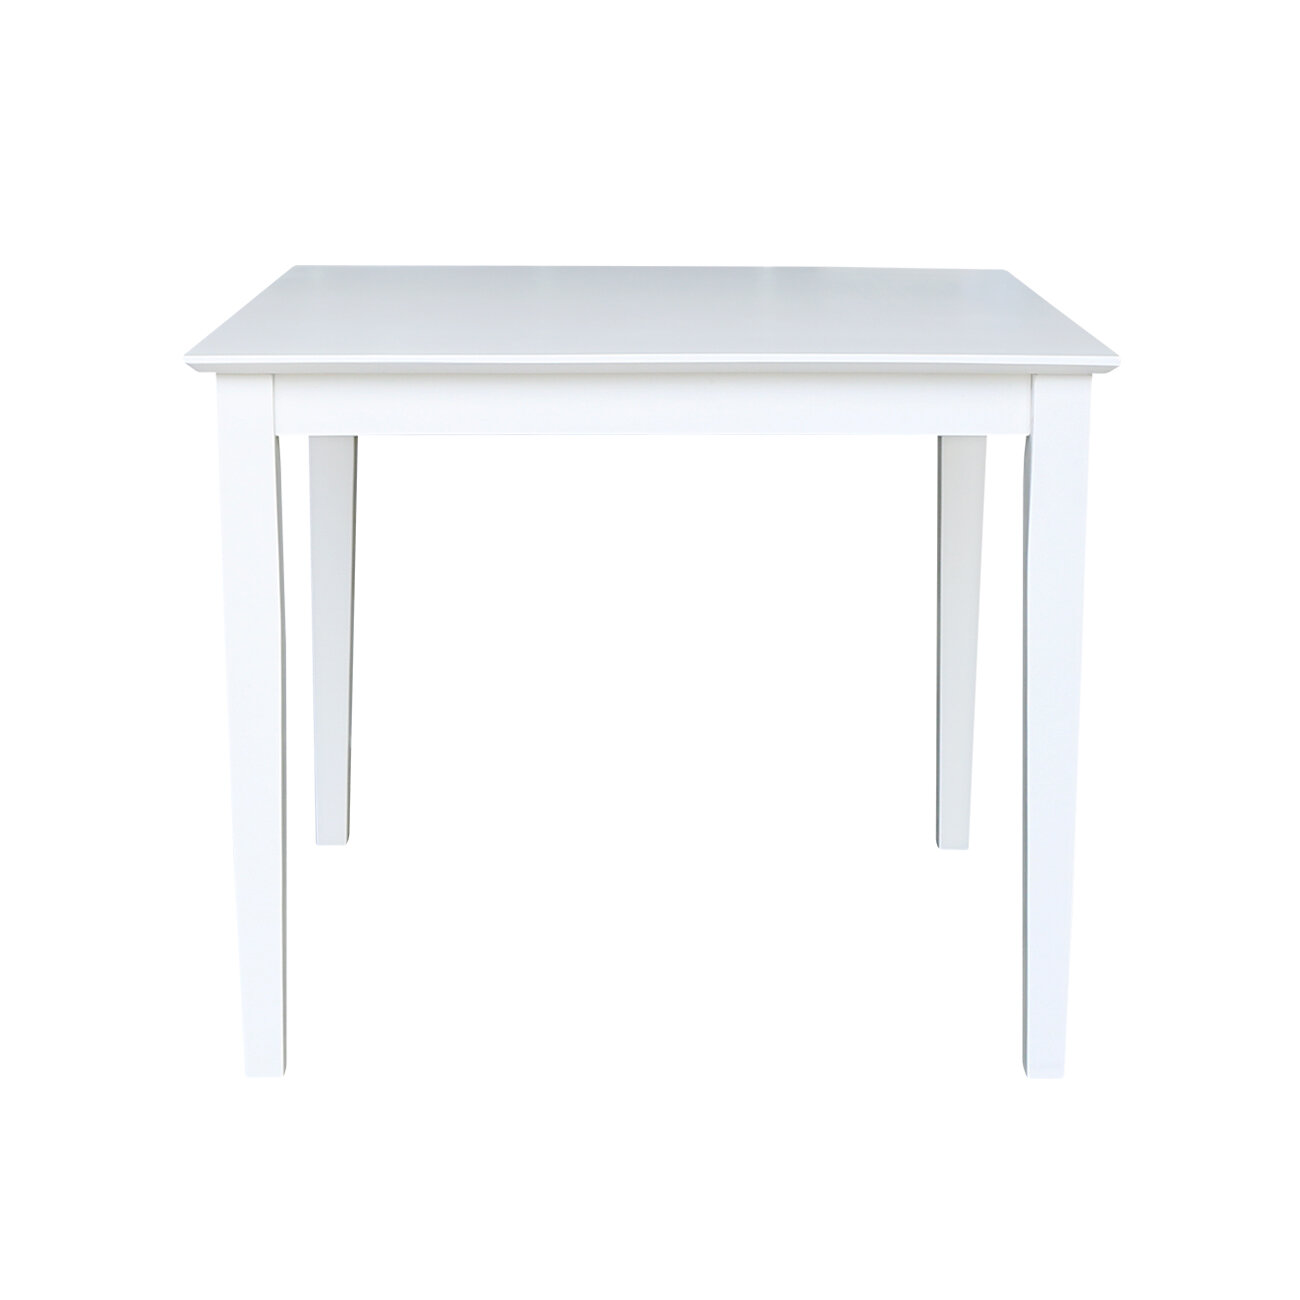 Modern Square Dining Kitchen Table in White Finish 